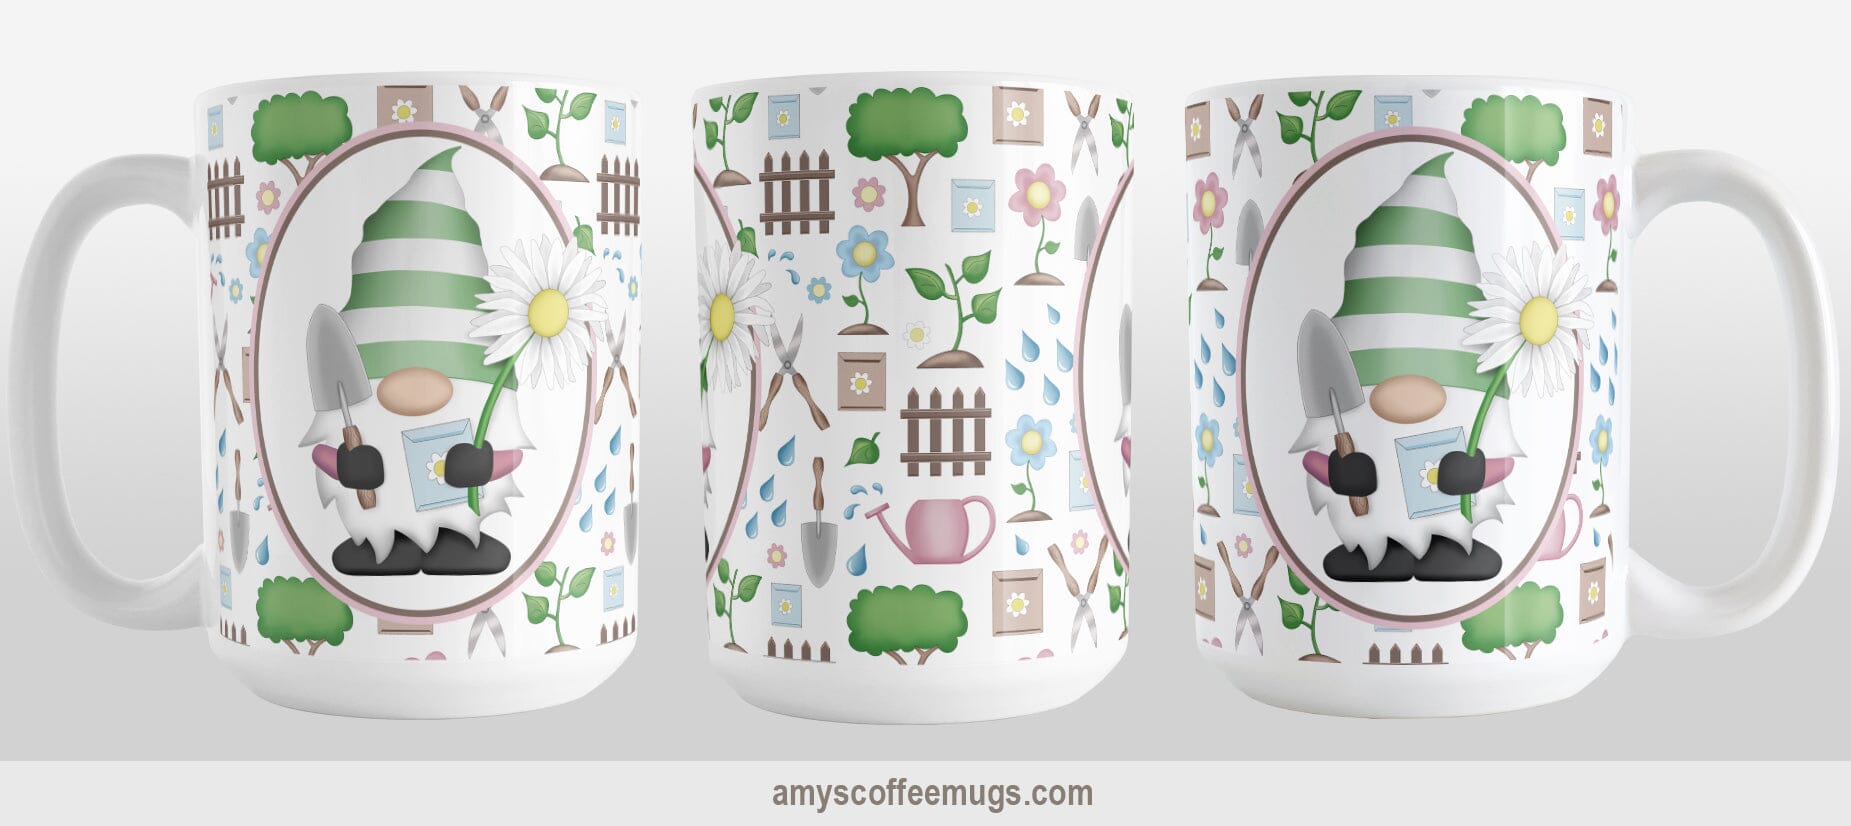 Spring Gnome Gardening Pattern Mug (15oz) at Amy's Coffee Mugs. A ceramic coffee mug designed with an adorable spring gardening gnome holding  an oversized daisy in a white oval over a springtime gardening pattern with trees, plants, flowers, seed packets, watering cans, fences, and gardening tools in spring colors such as pink, blue, green, and brown. Photo shows three views of the mug.